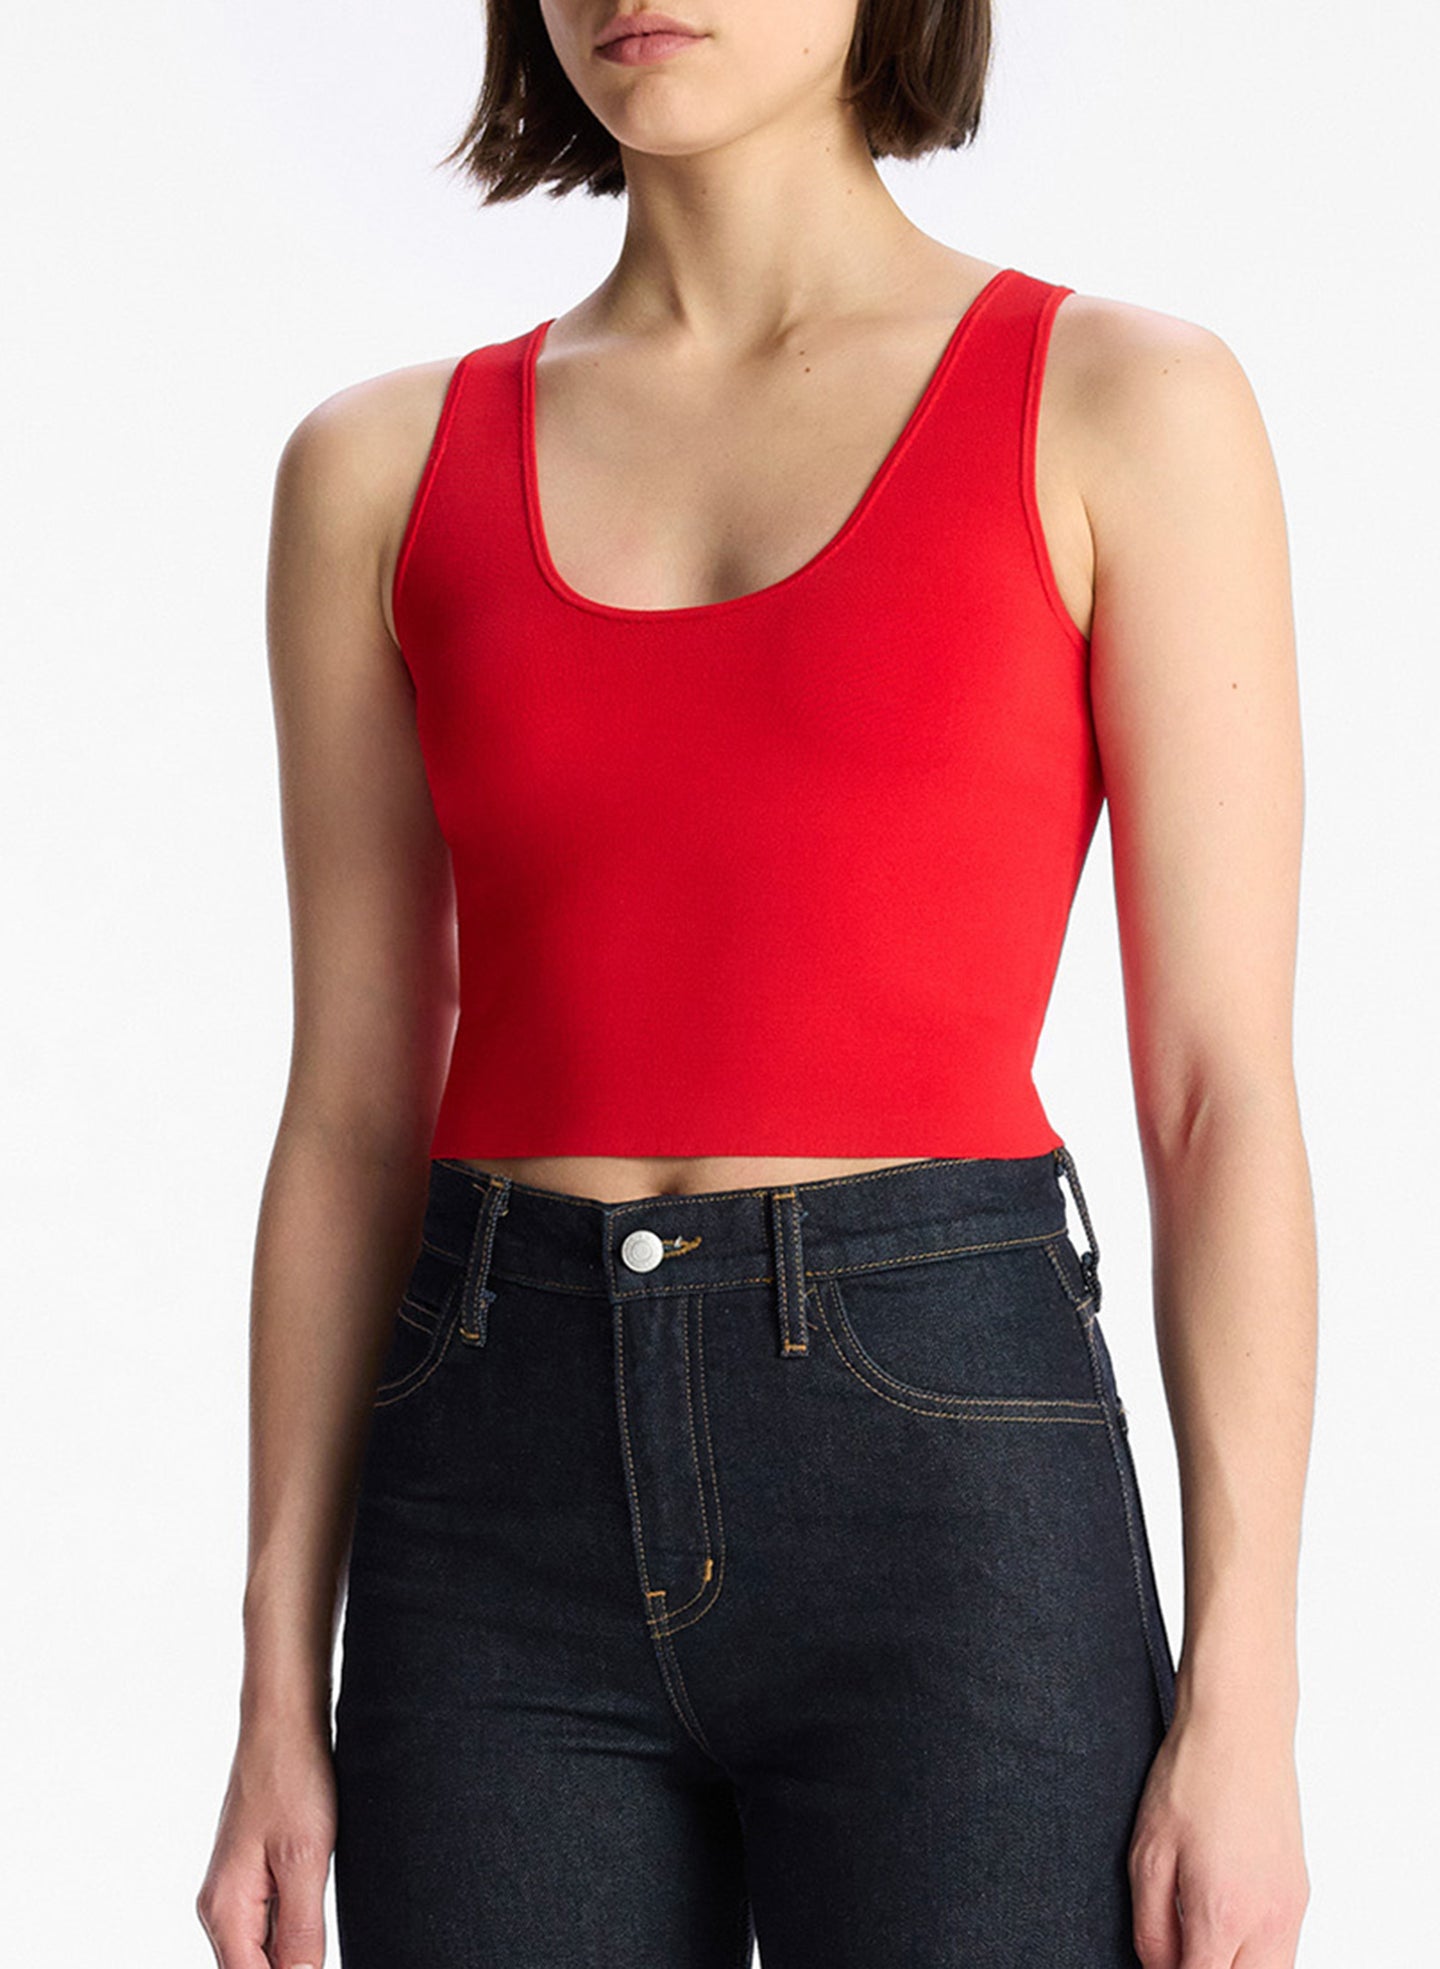 detail view of woman wearing red sleeveless top and dark wash denim jeans